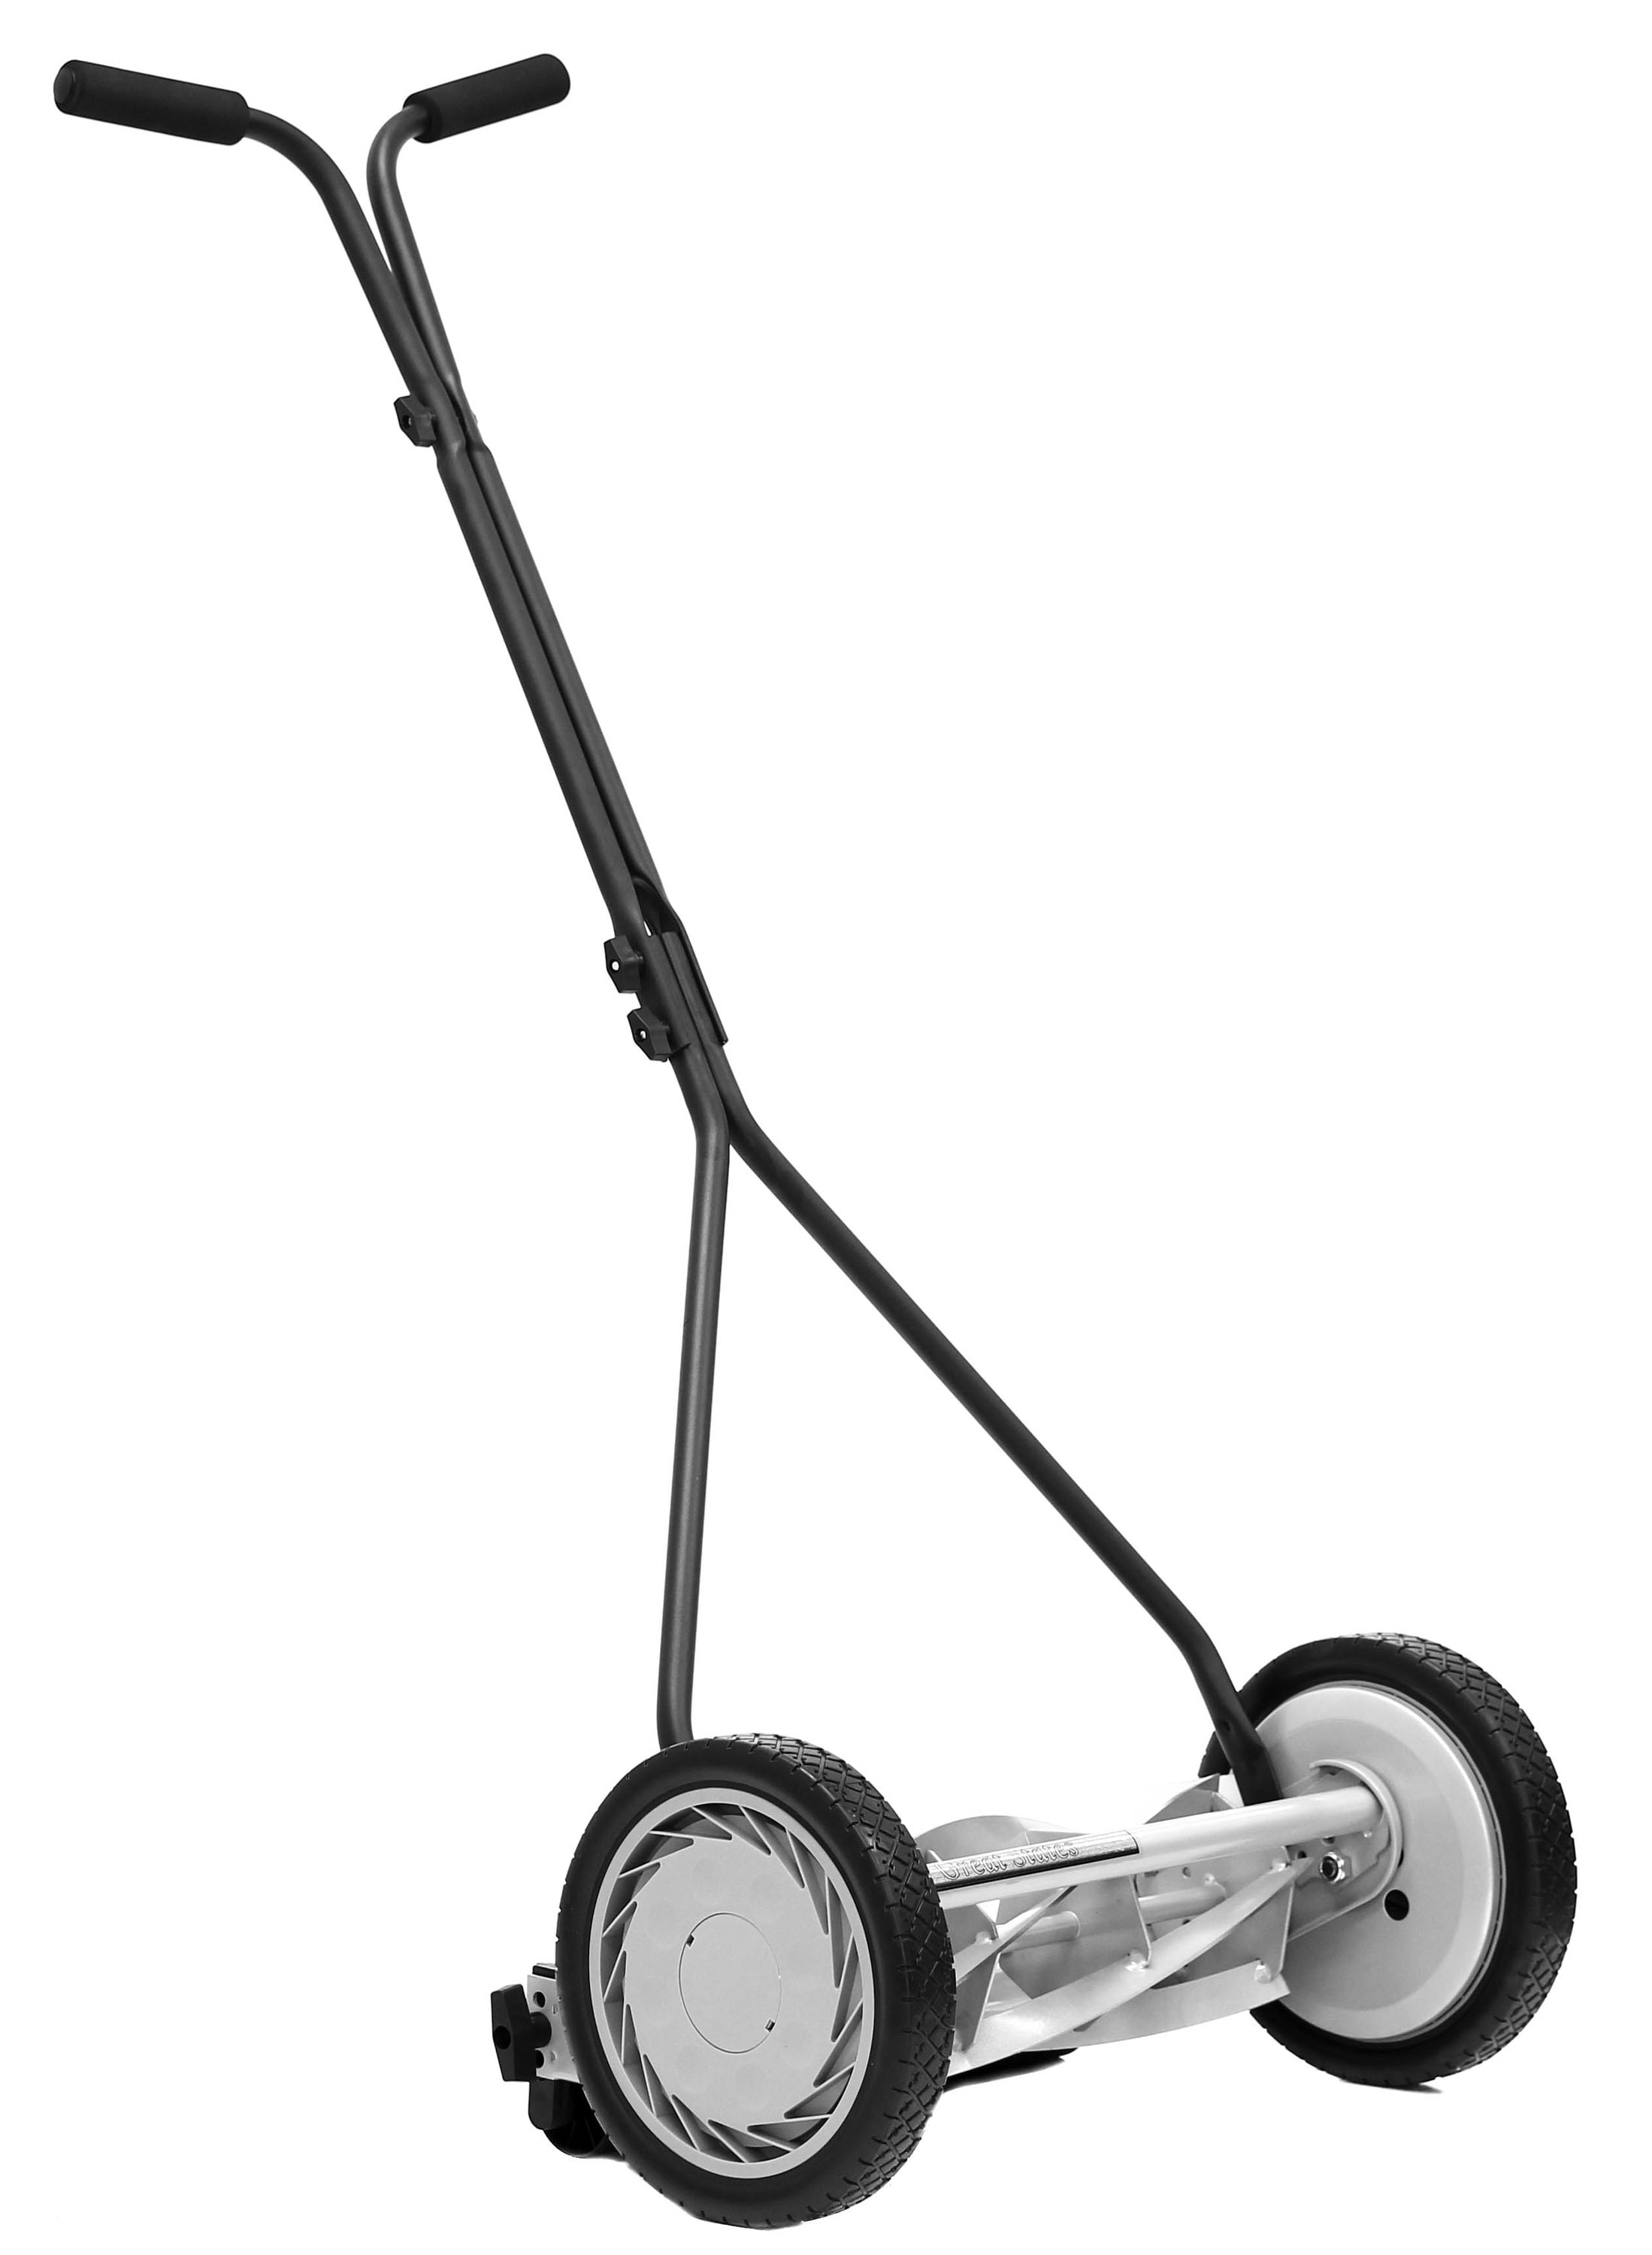 Great States - 415-16 - 16 in. Push Reel Lawn Mower